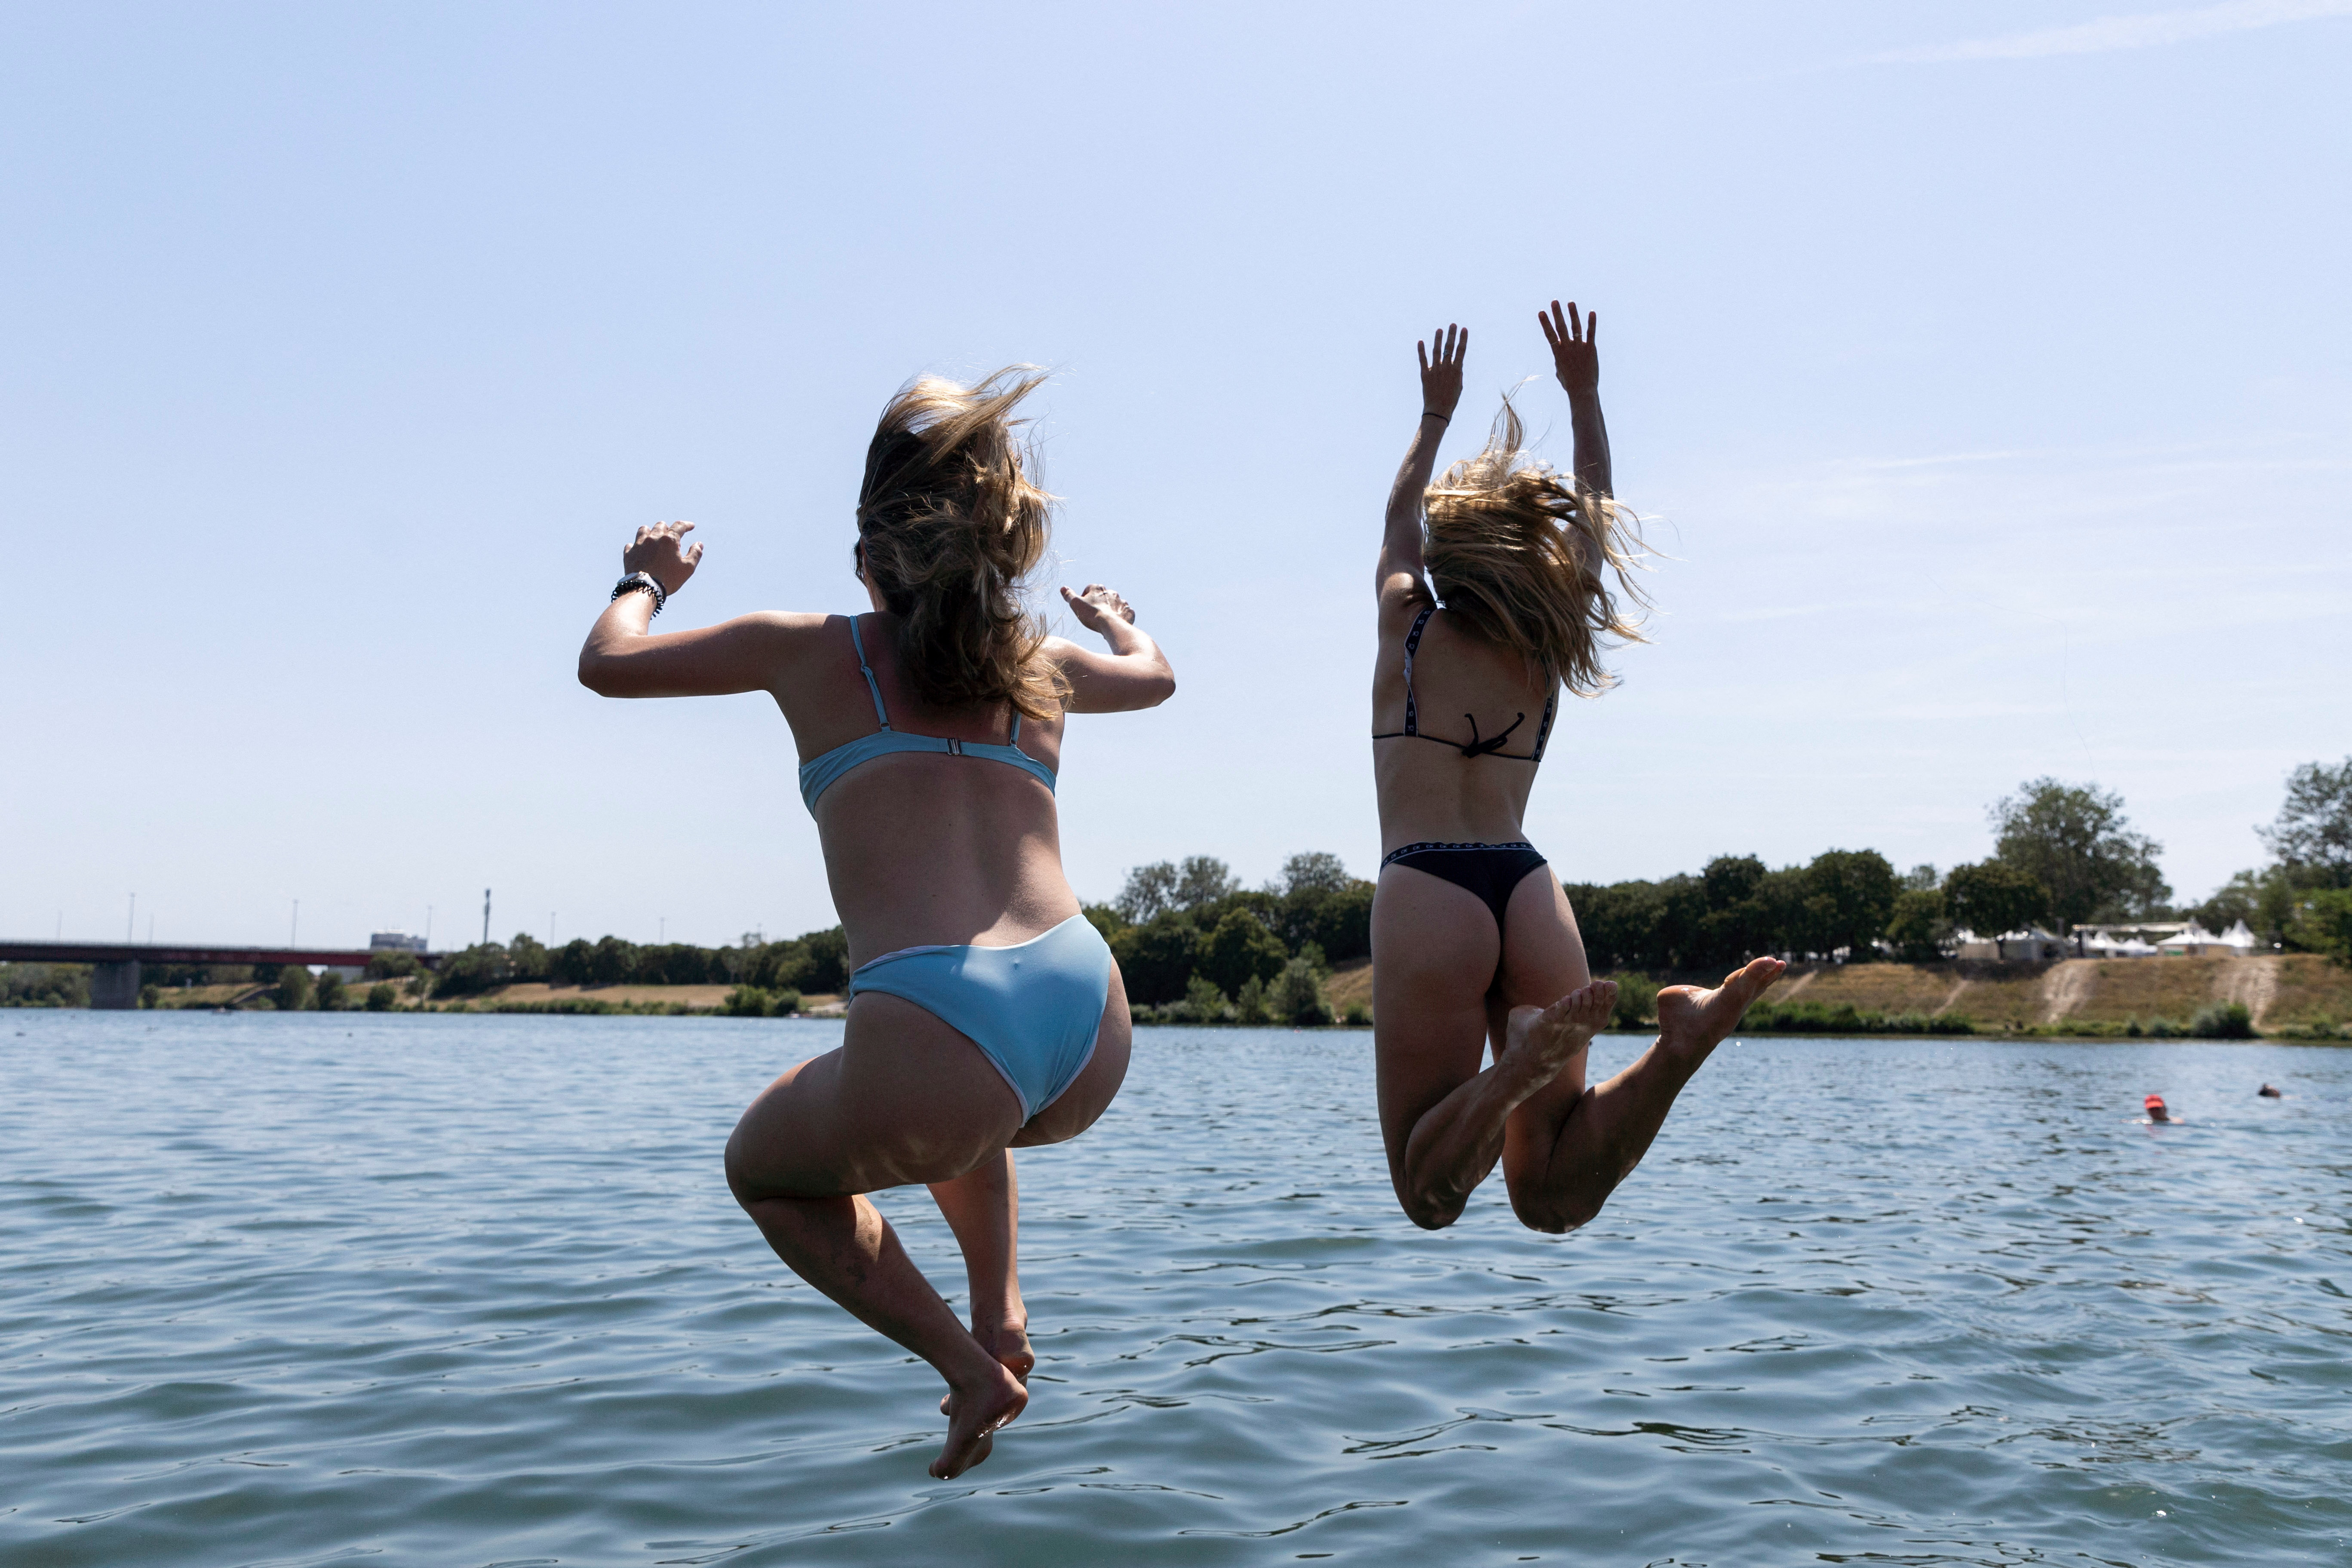 Two women cool off on the Danube River in Vienna due to intense heatwave (REUTERS/Lisa Leutner)